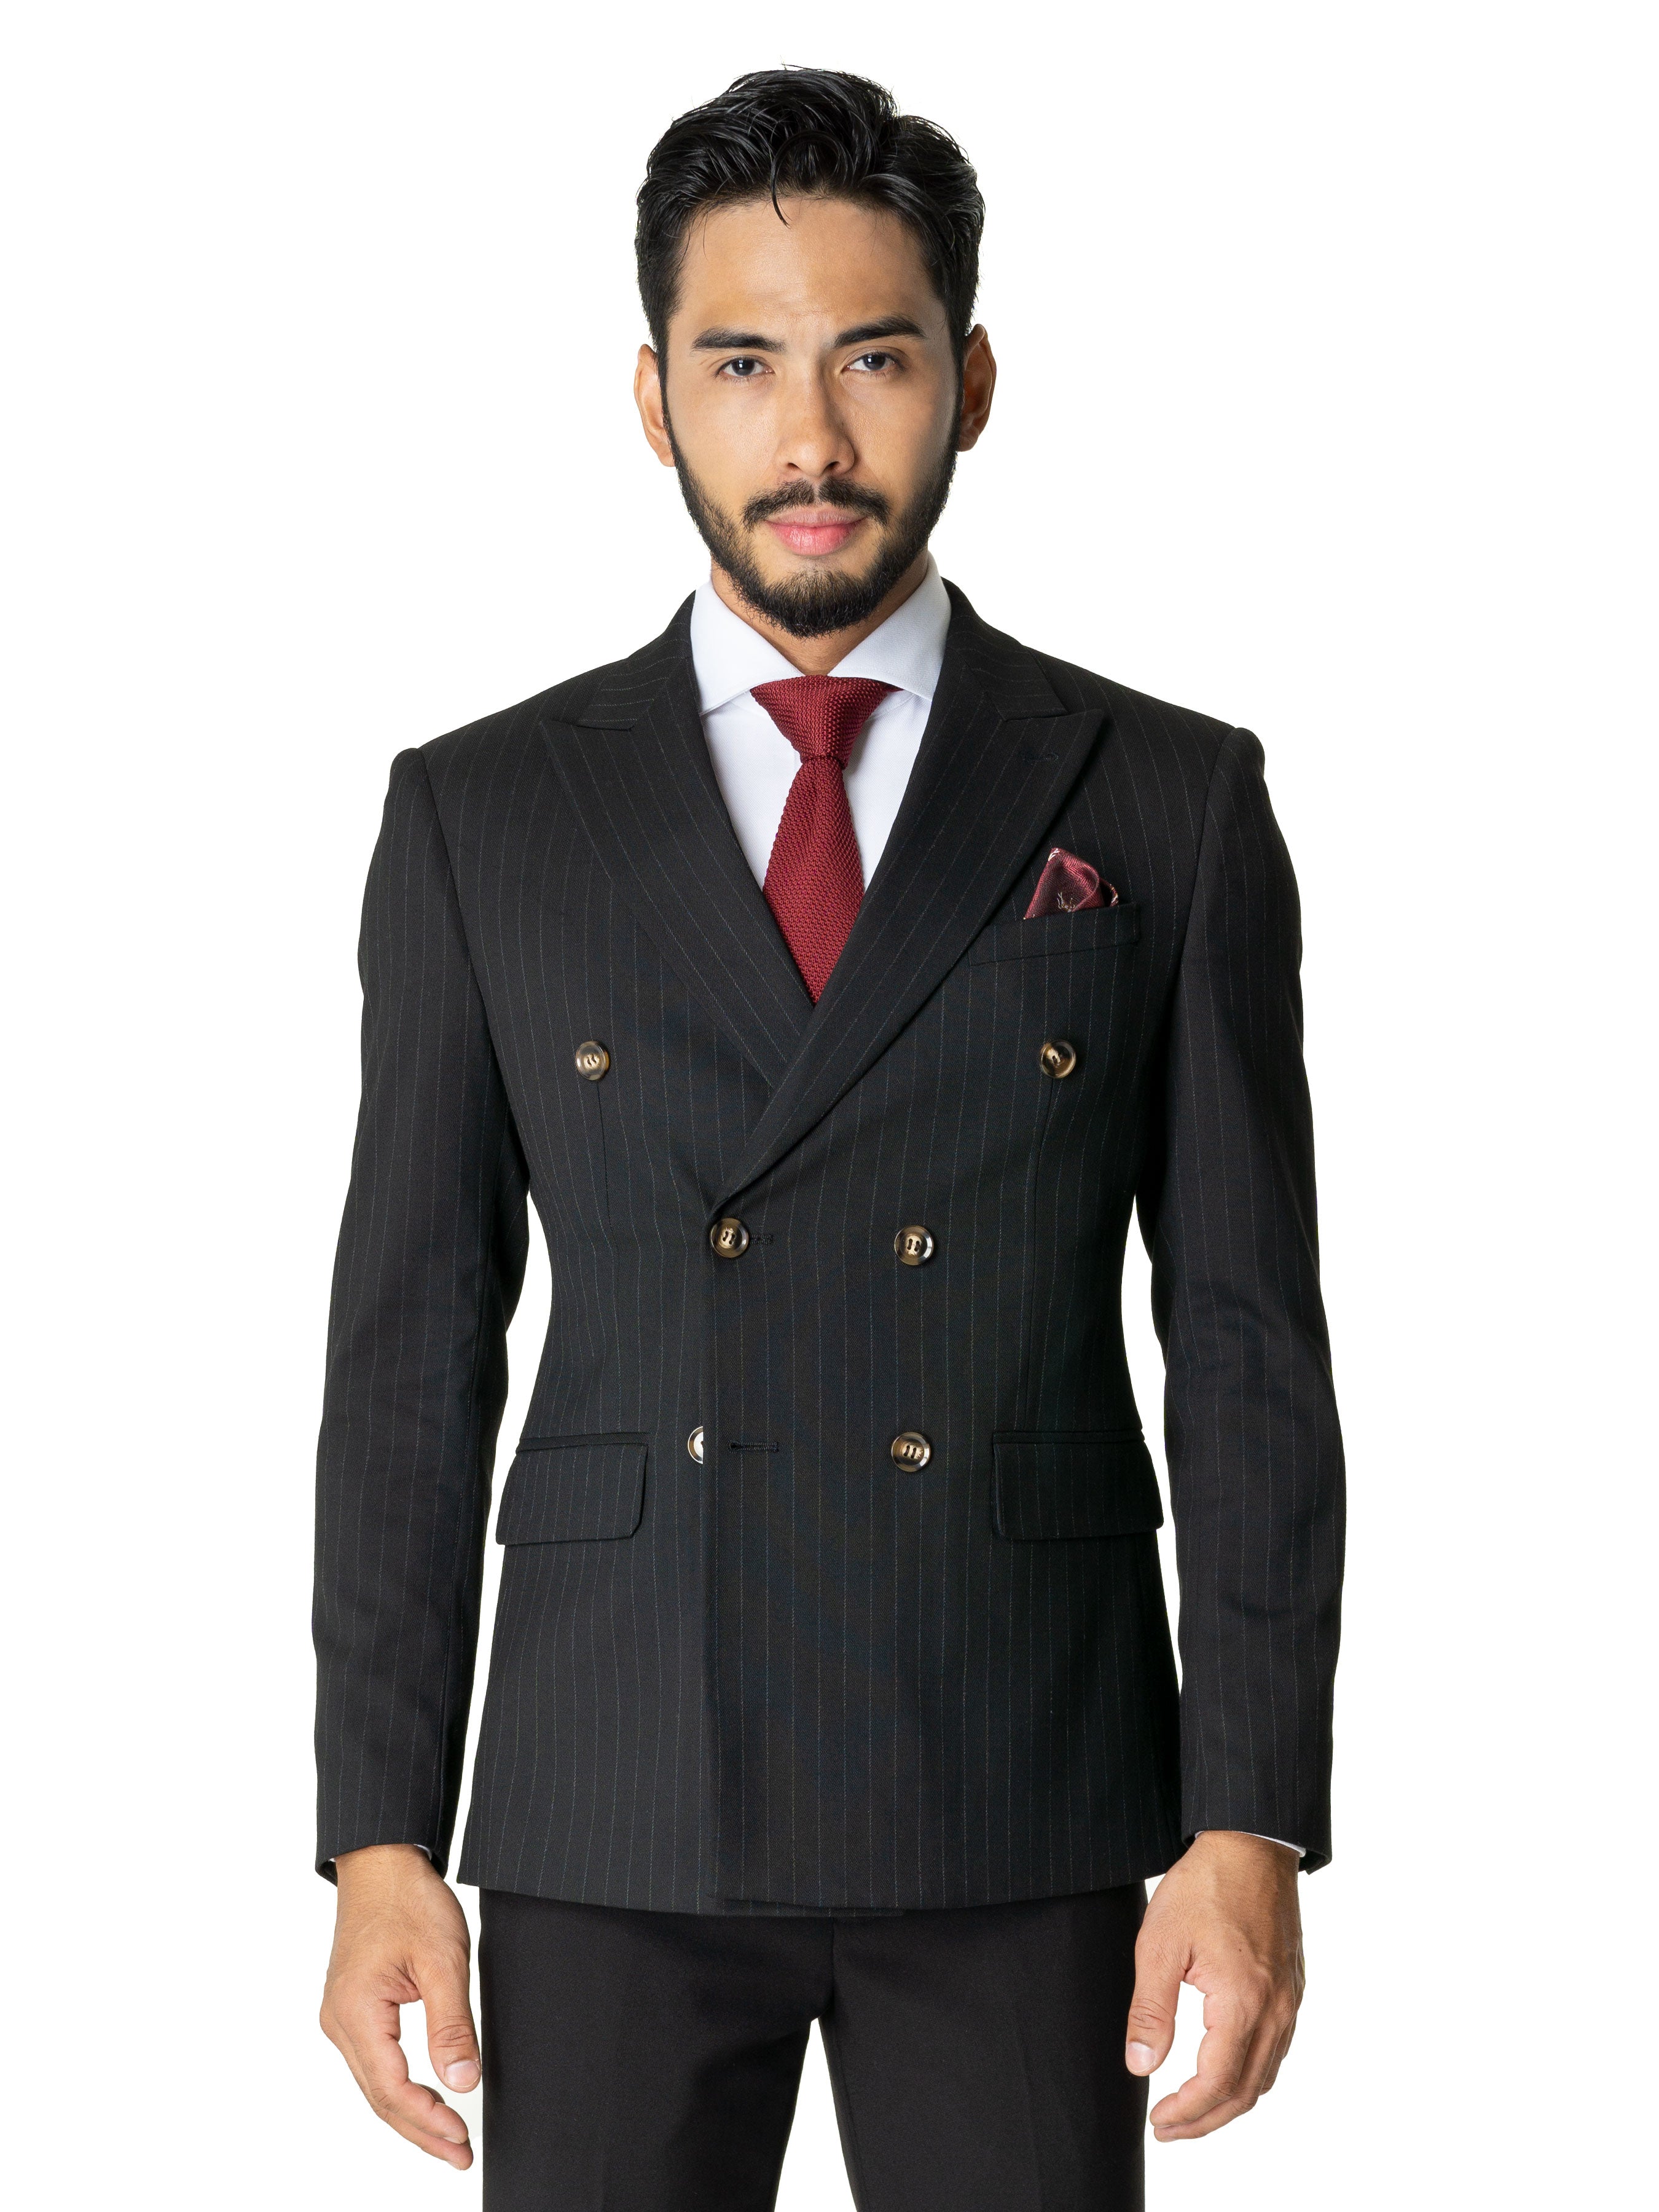 https://cdn.shopify.com/s/files/1/0955/9146/products/Double-Breasted-Suit-Blazer-Black-Stripes_01.jpg?v=1656062621